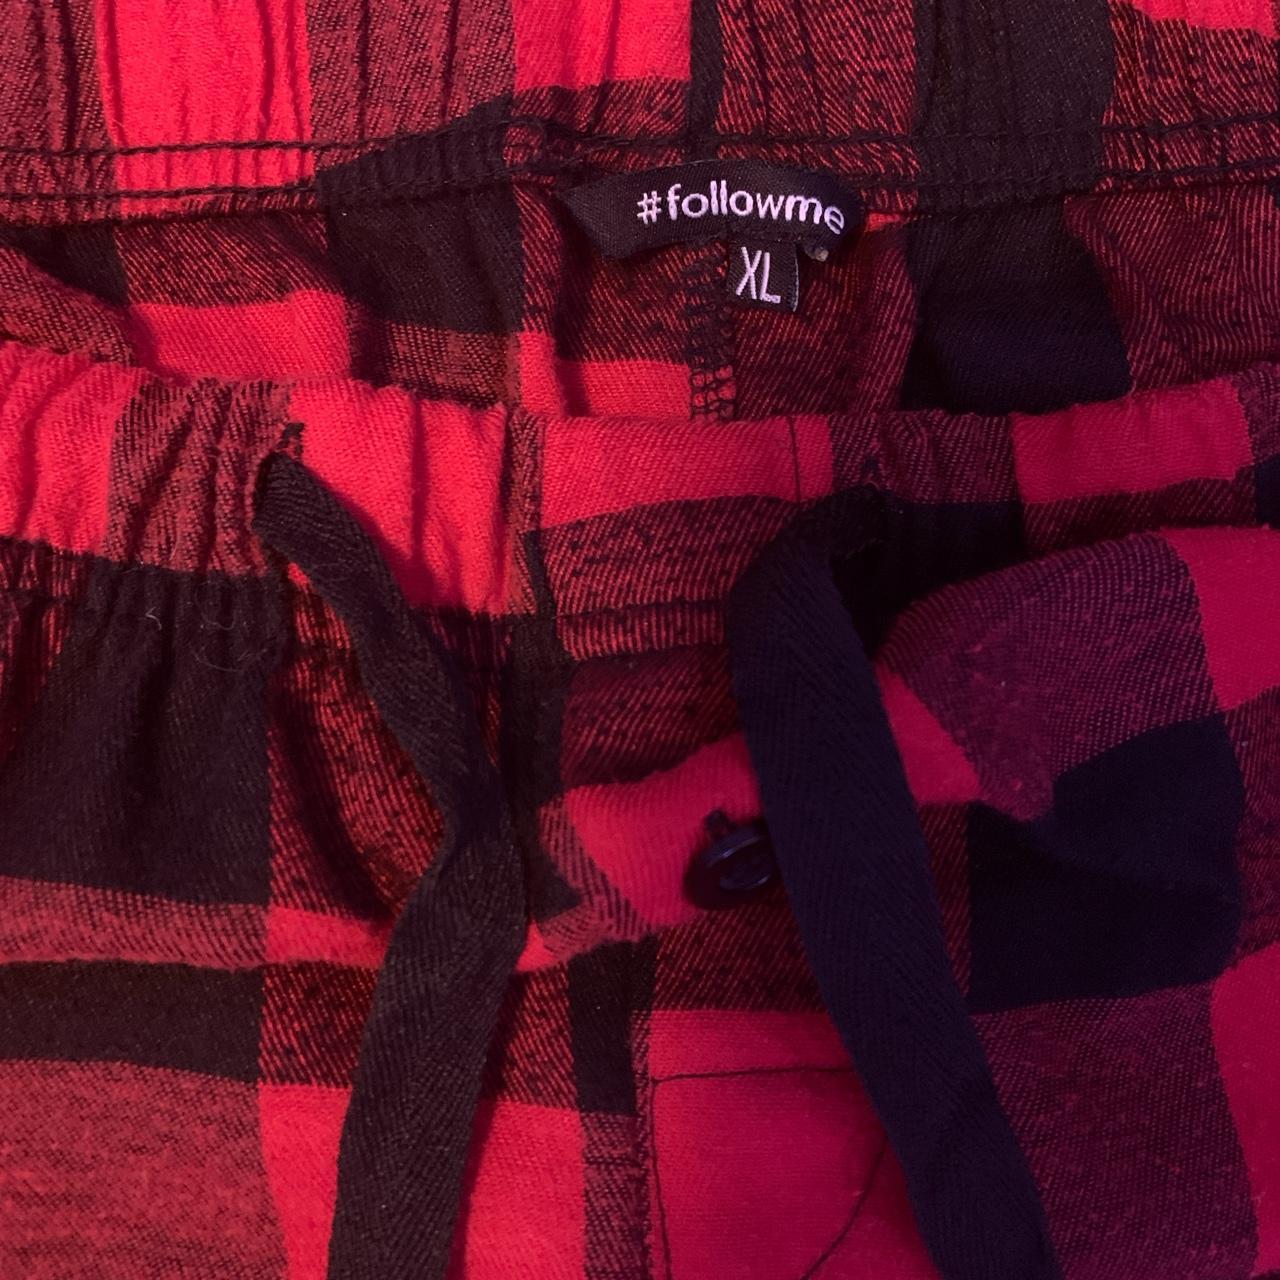 Black & Red Pajama Pants Perfect Condition, Now... - Depop